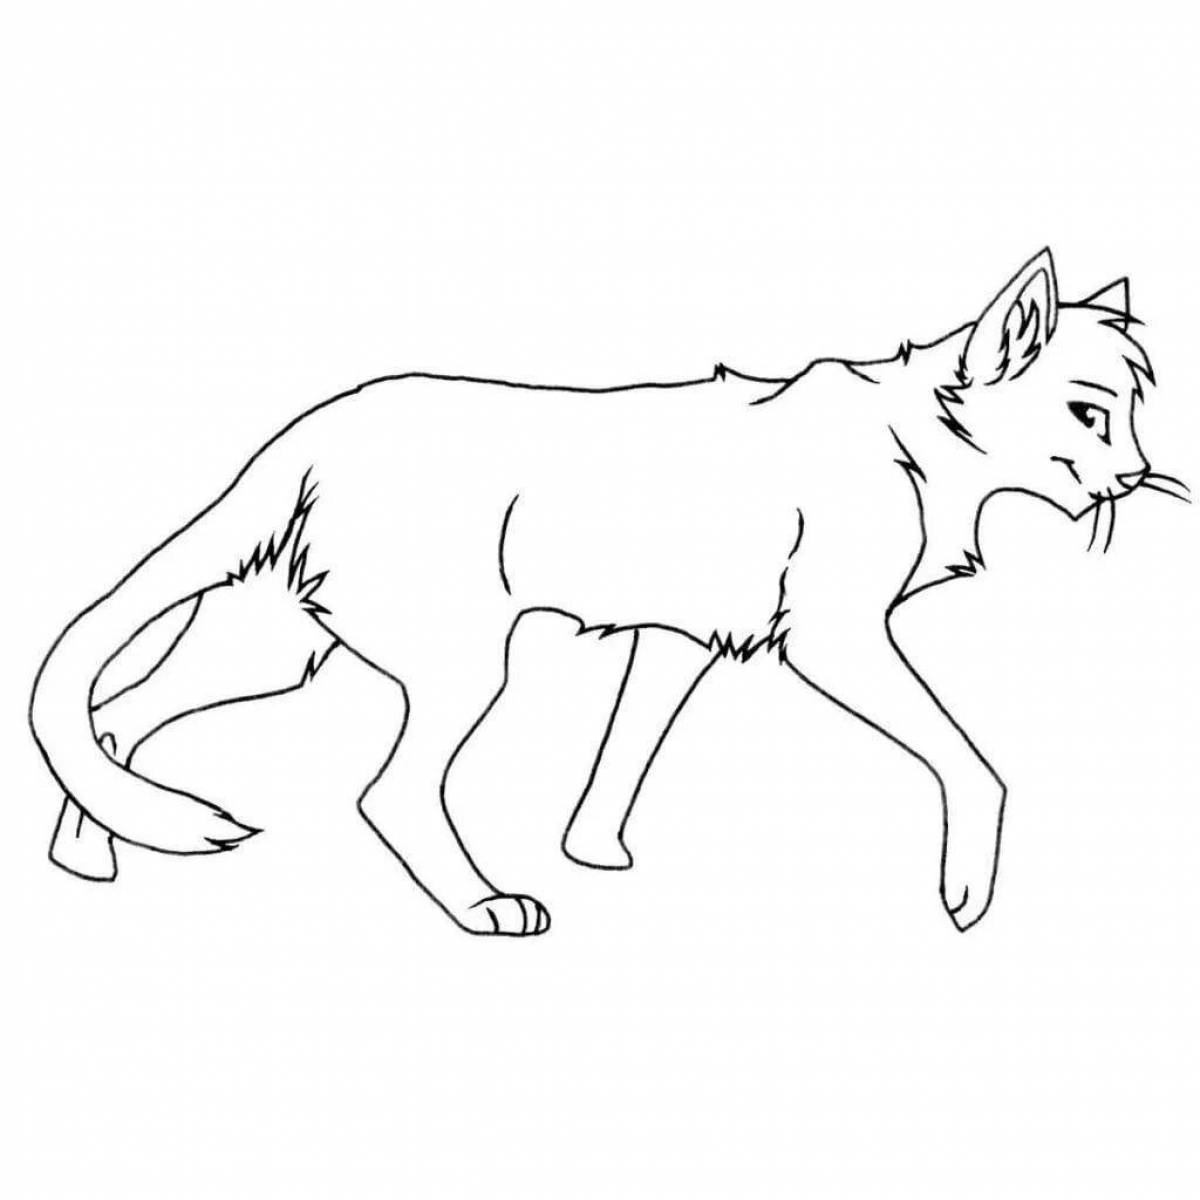 Flawless Firestar Warrior Cats coloring page